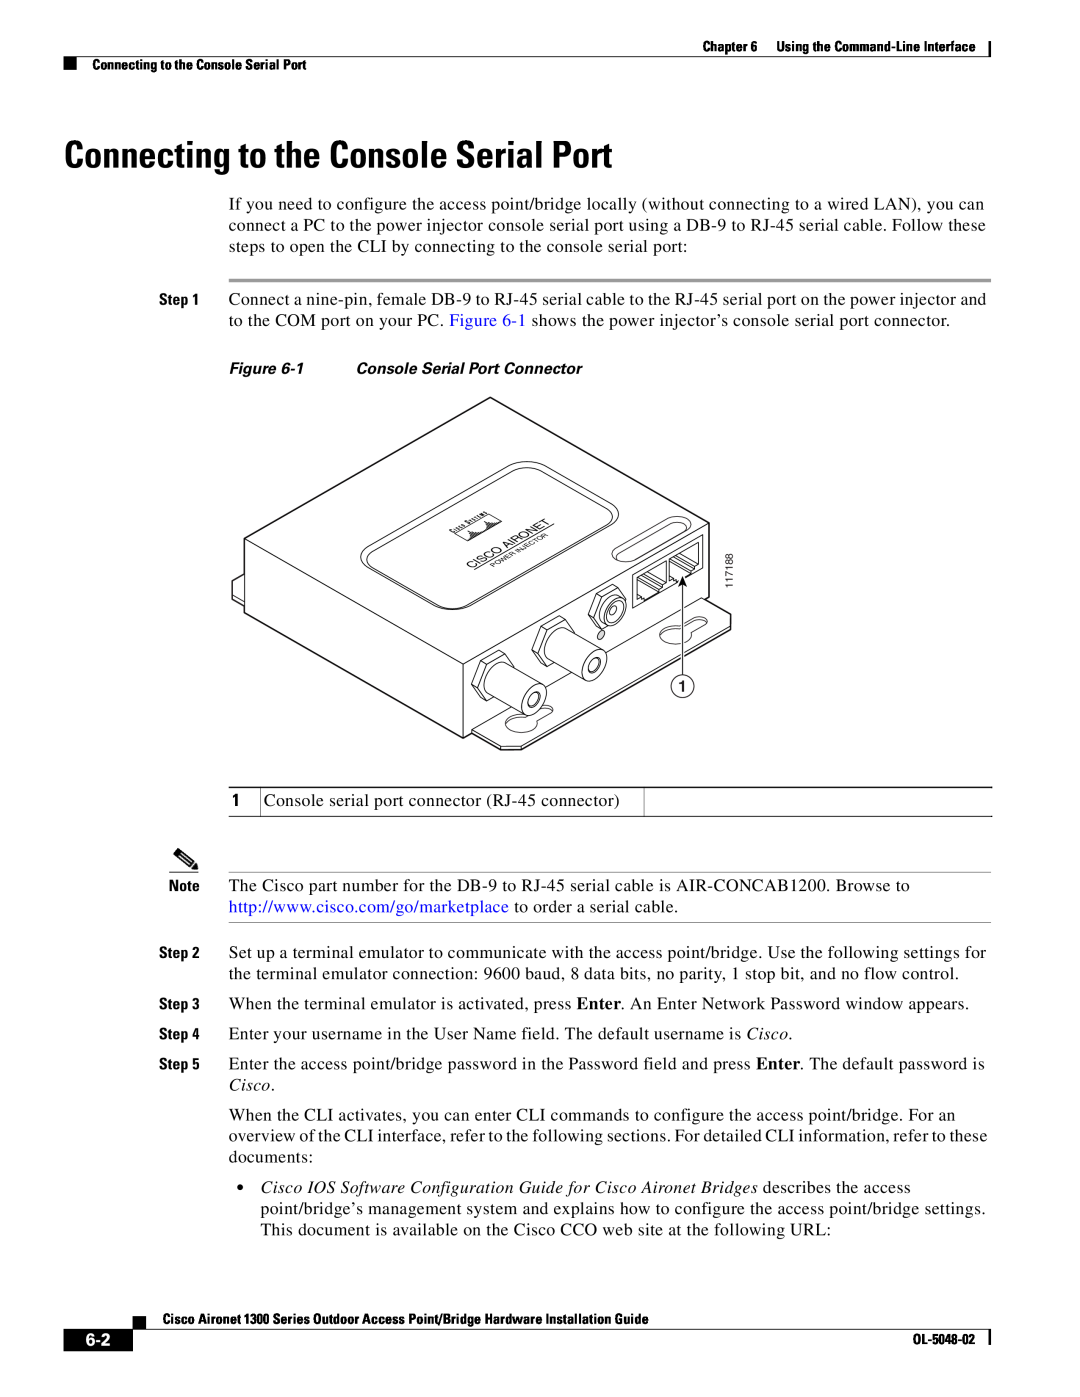 Cisco Systems 1300 Series manual Connecting to the Console Serial Port 